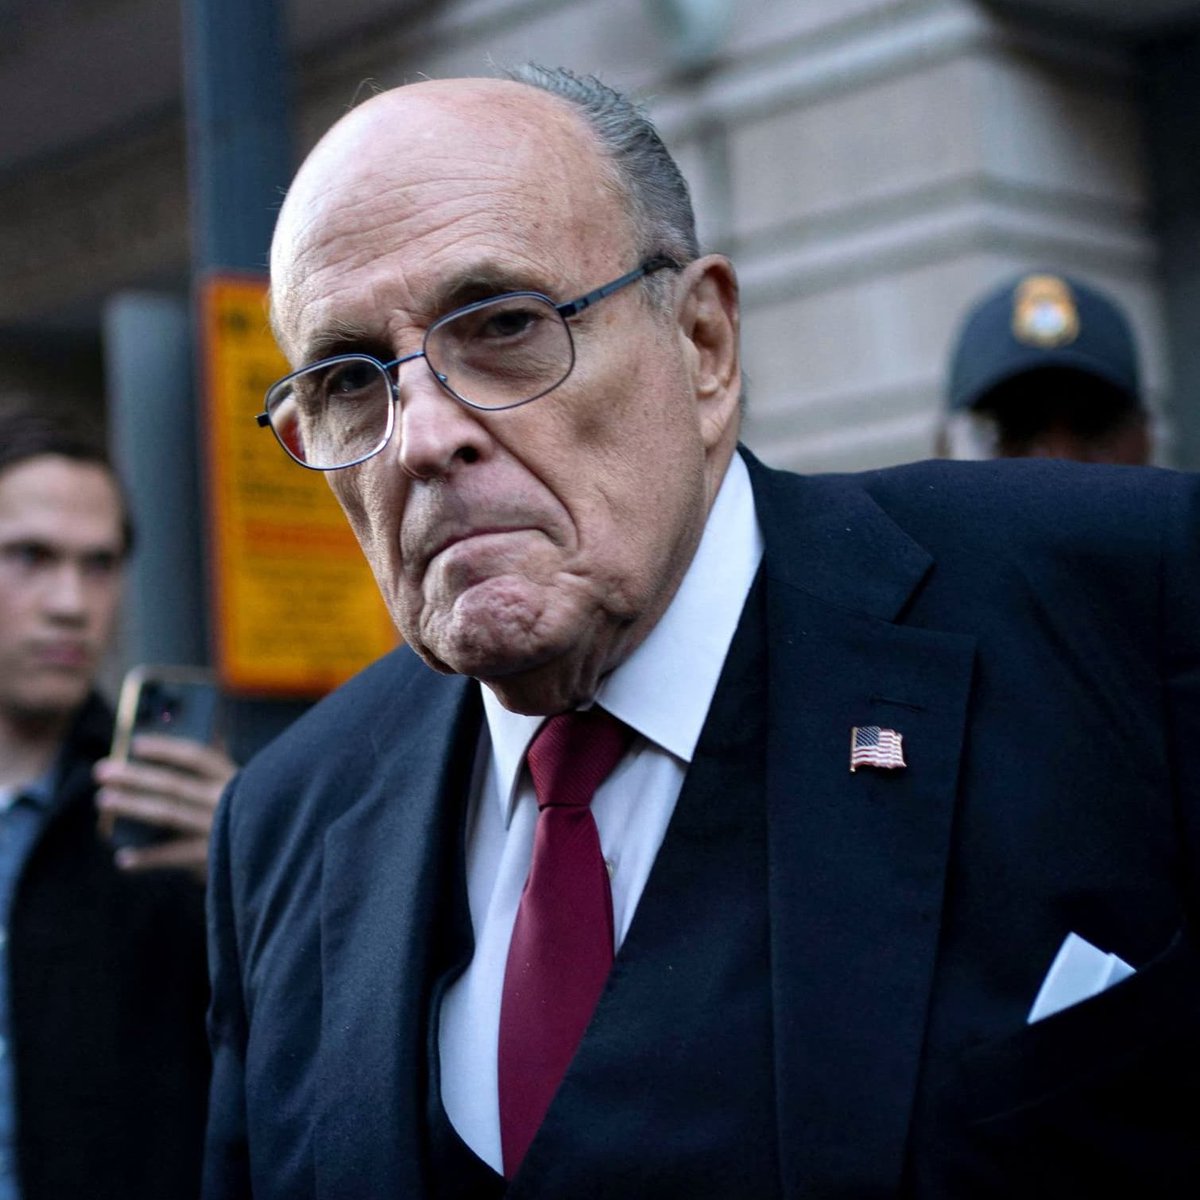 🚨NEWS: Rudy Giuliani, former Trump attorney and major spreader of The Big Lie, haws been SUSPENDED by WABC and his show has been canceled for violating company policy. Want to guess which policy he violated? That's right: spreading MORE disinformation about the 2020 election.…